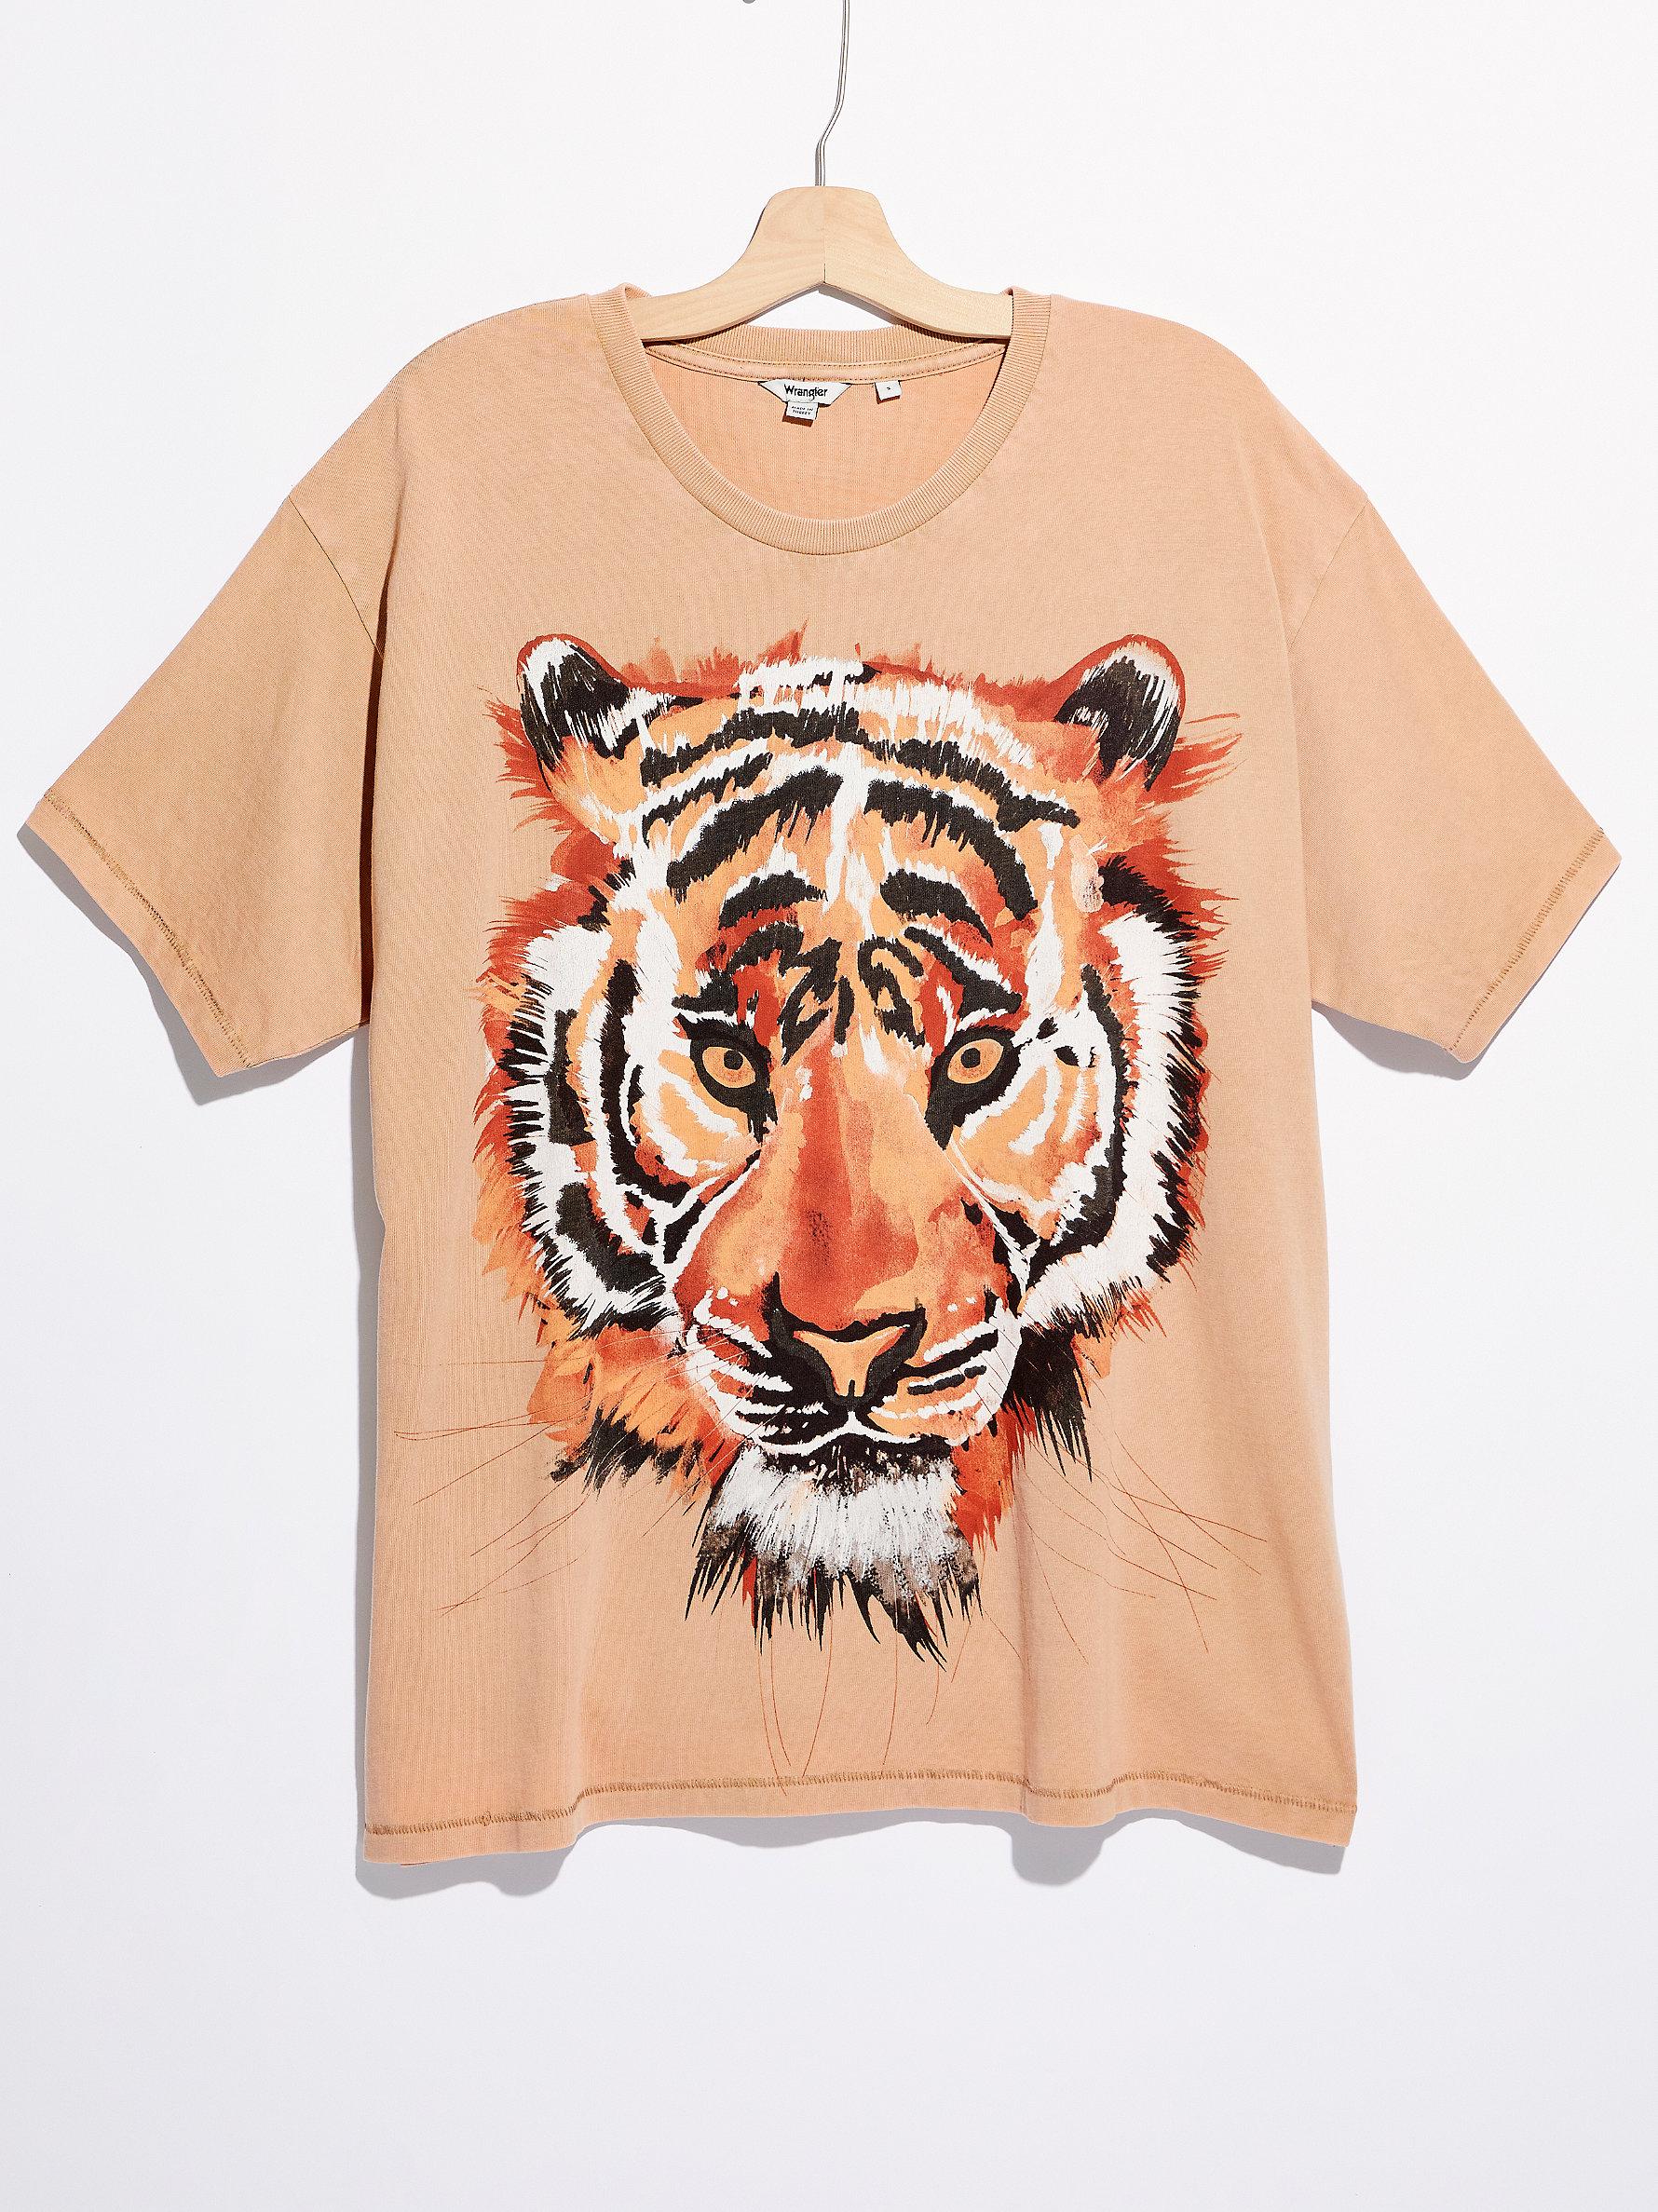 Free People Wrangler Oversized Tiger Tee in Brown - Lyst